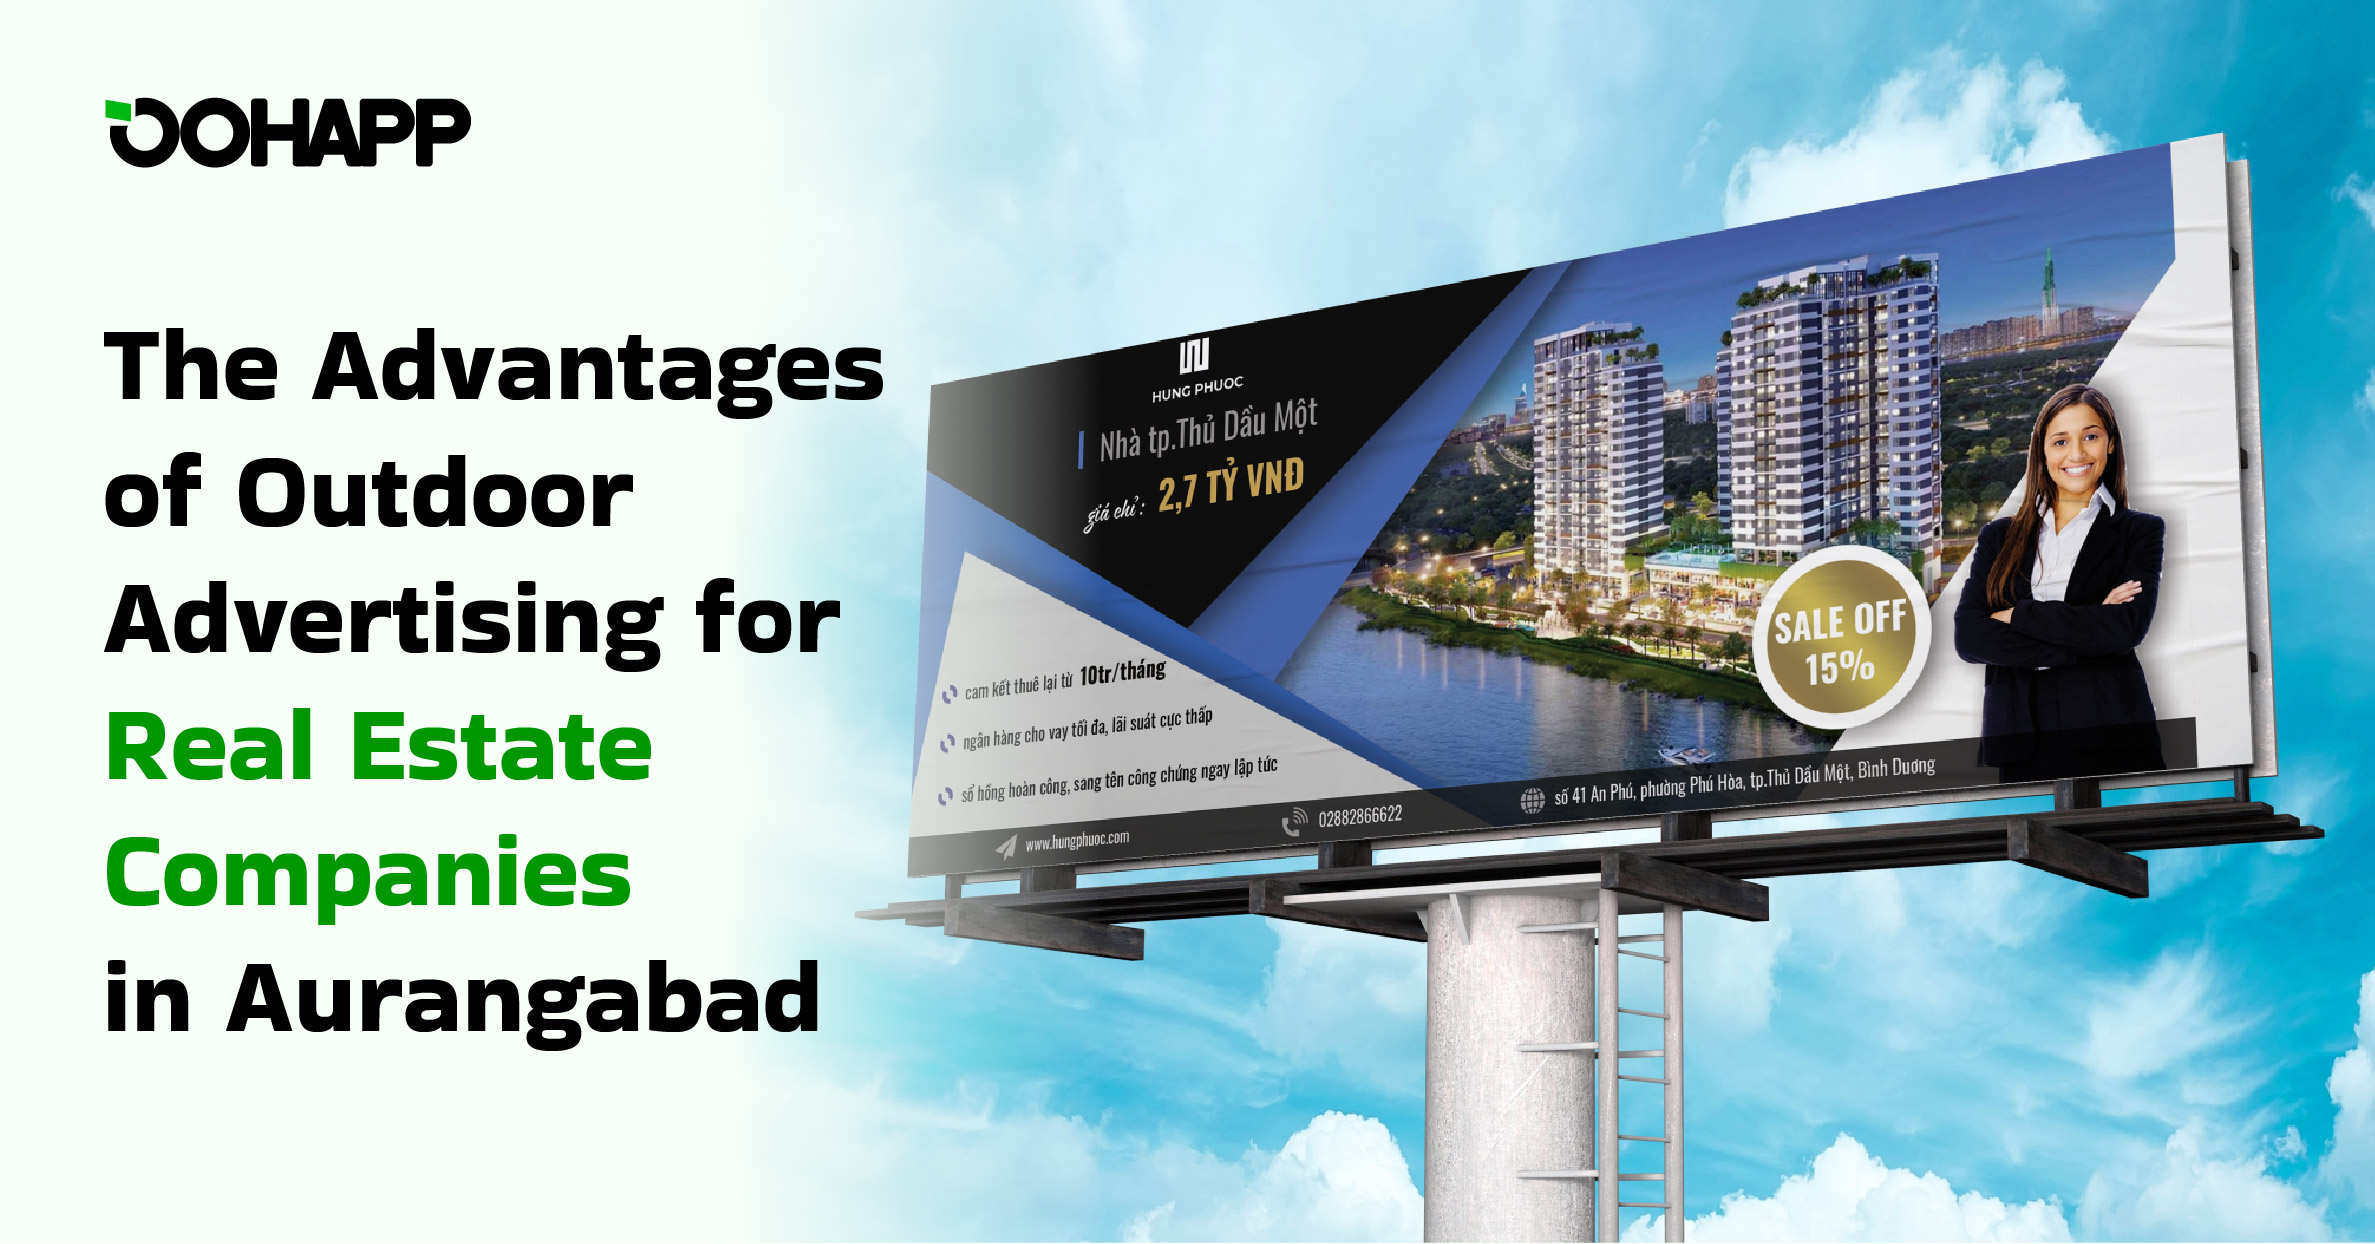 The Advantages of Outdoor Advertising for Real Estate Companies in Aurangabad